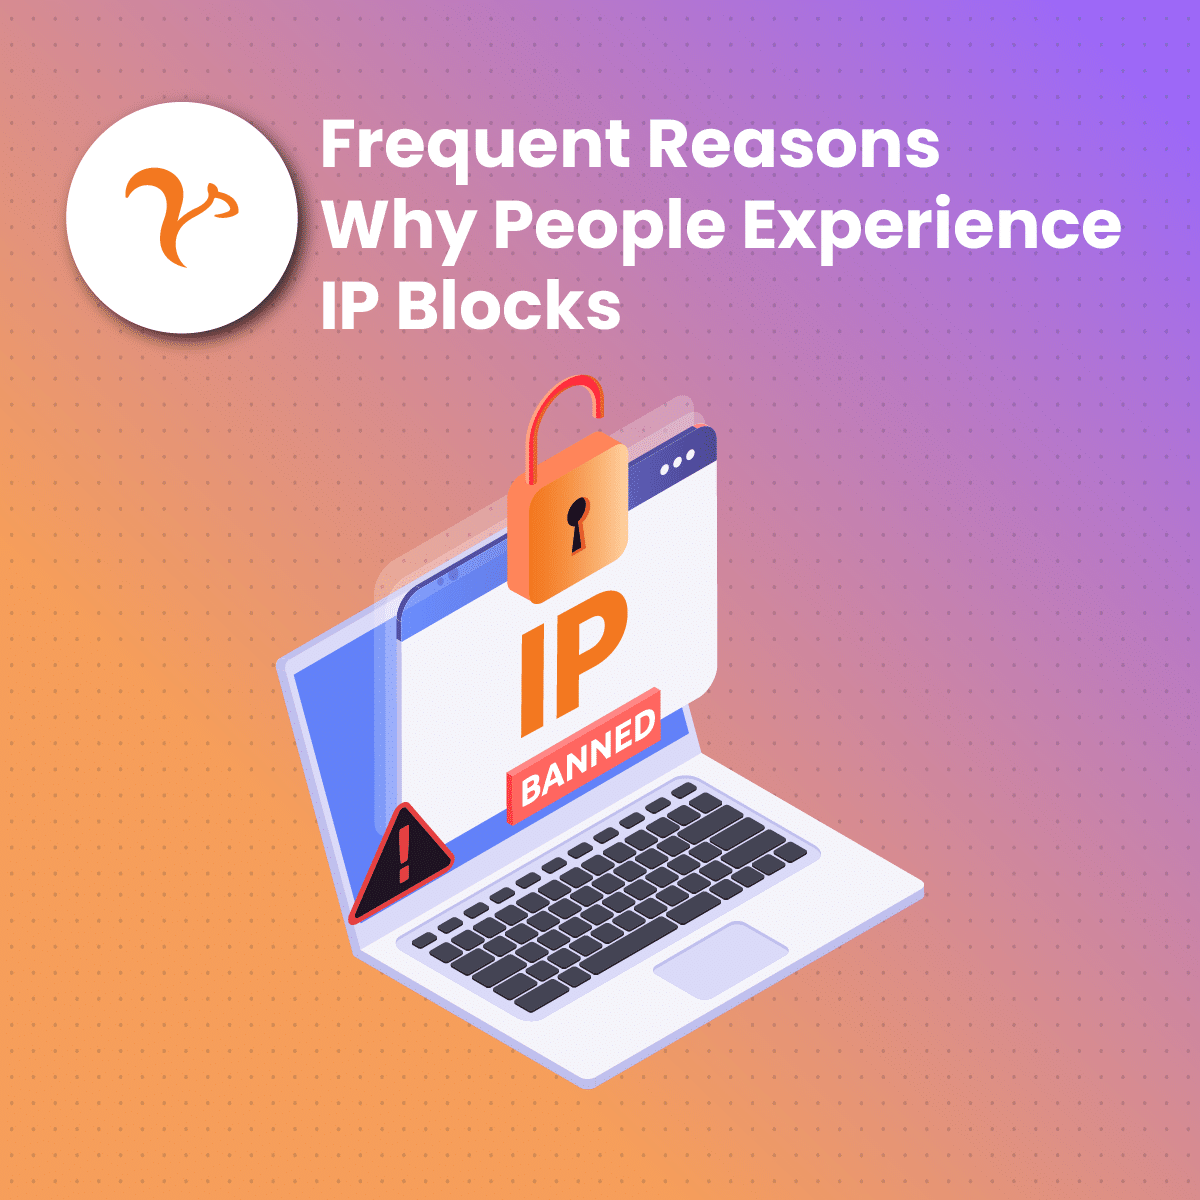 Frequent Reasons Why People Experience IP Blocks